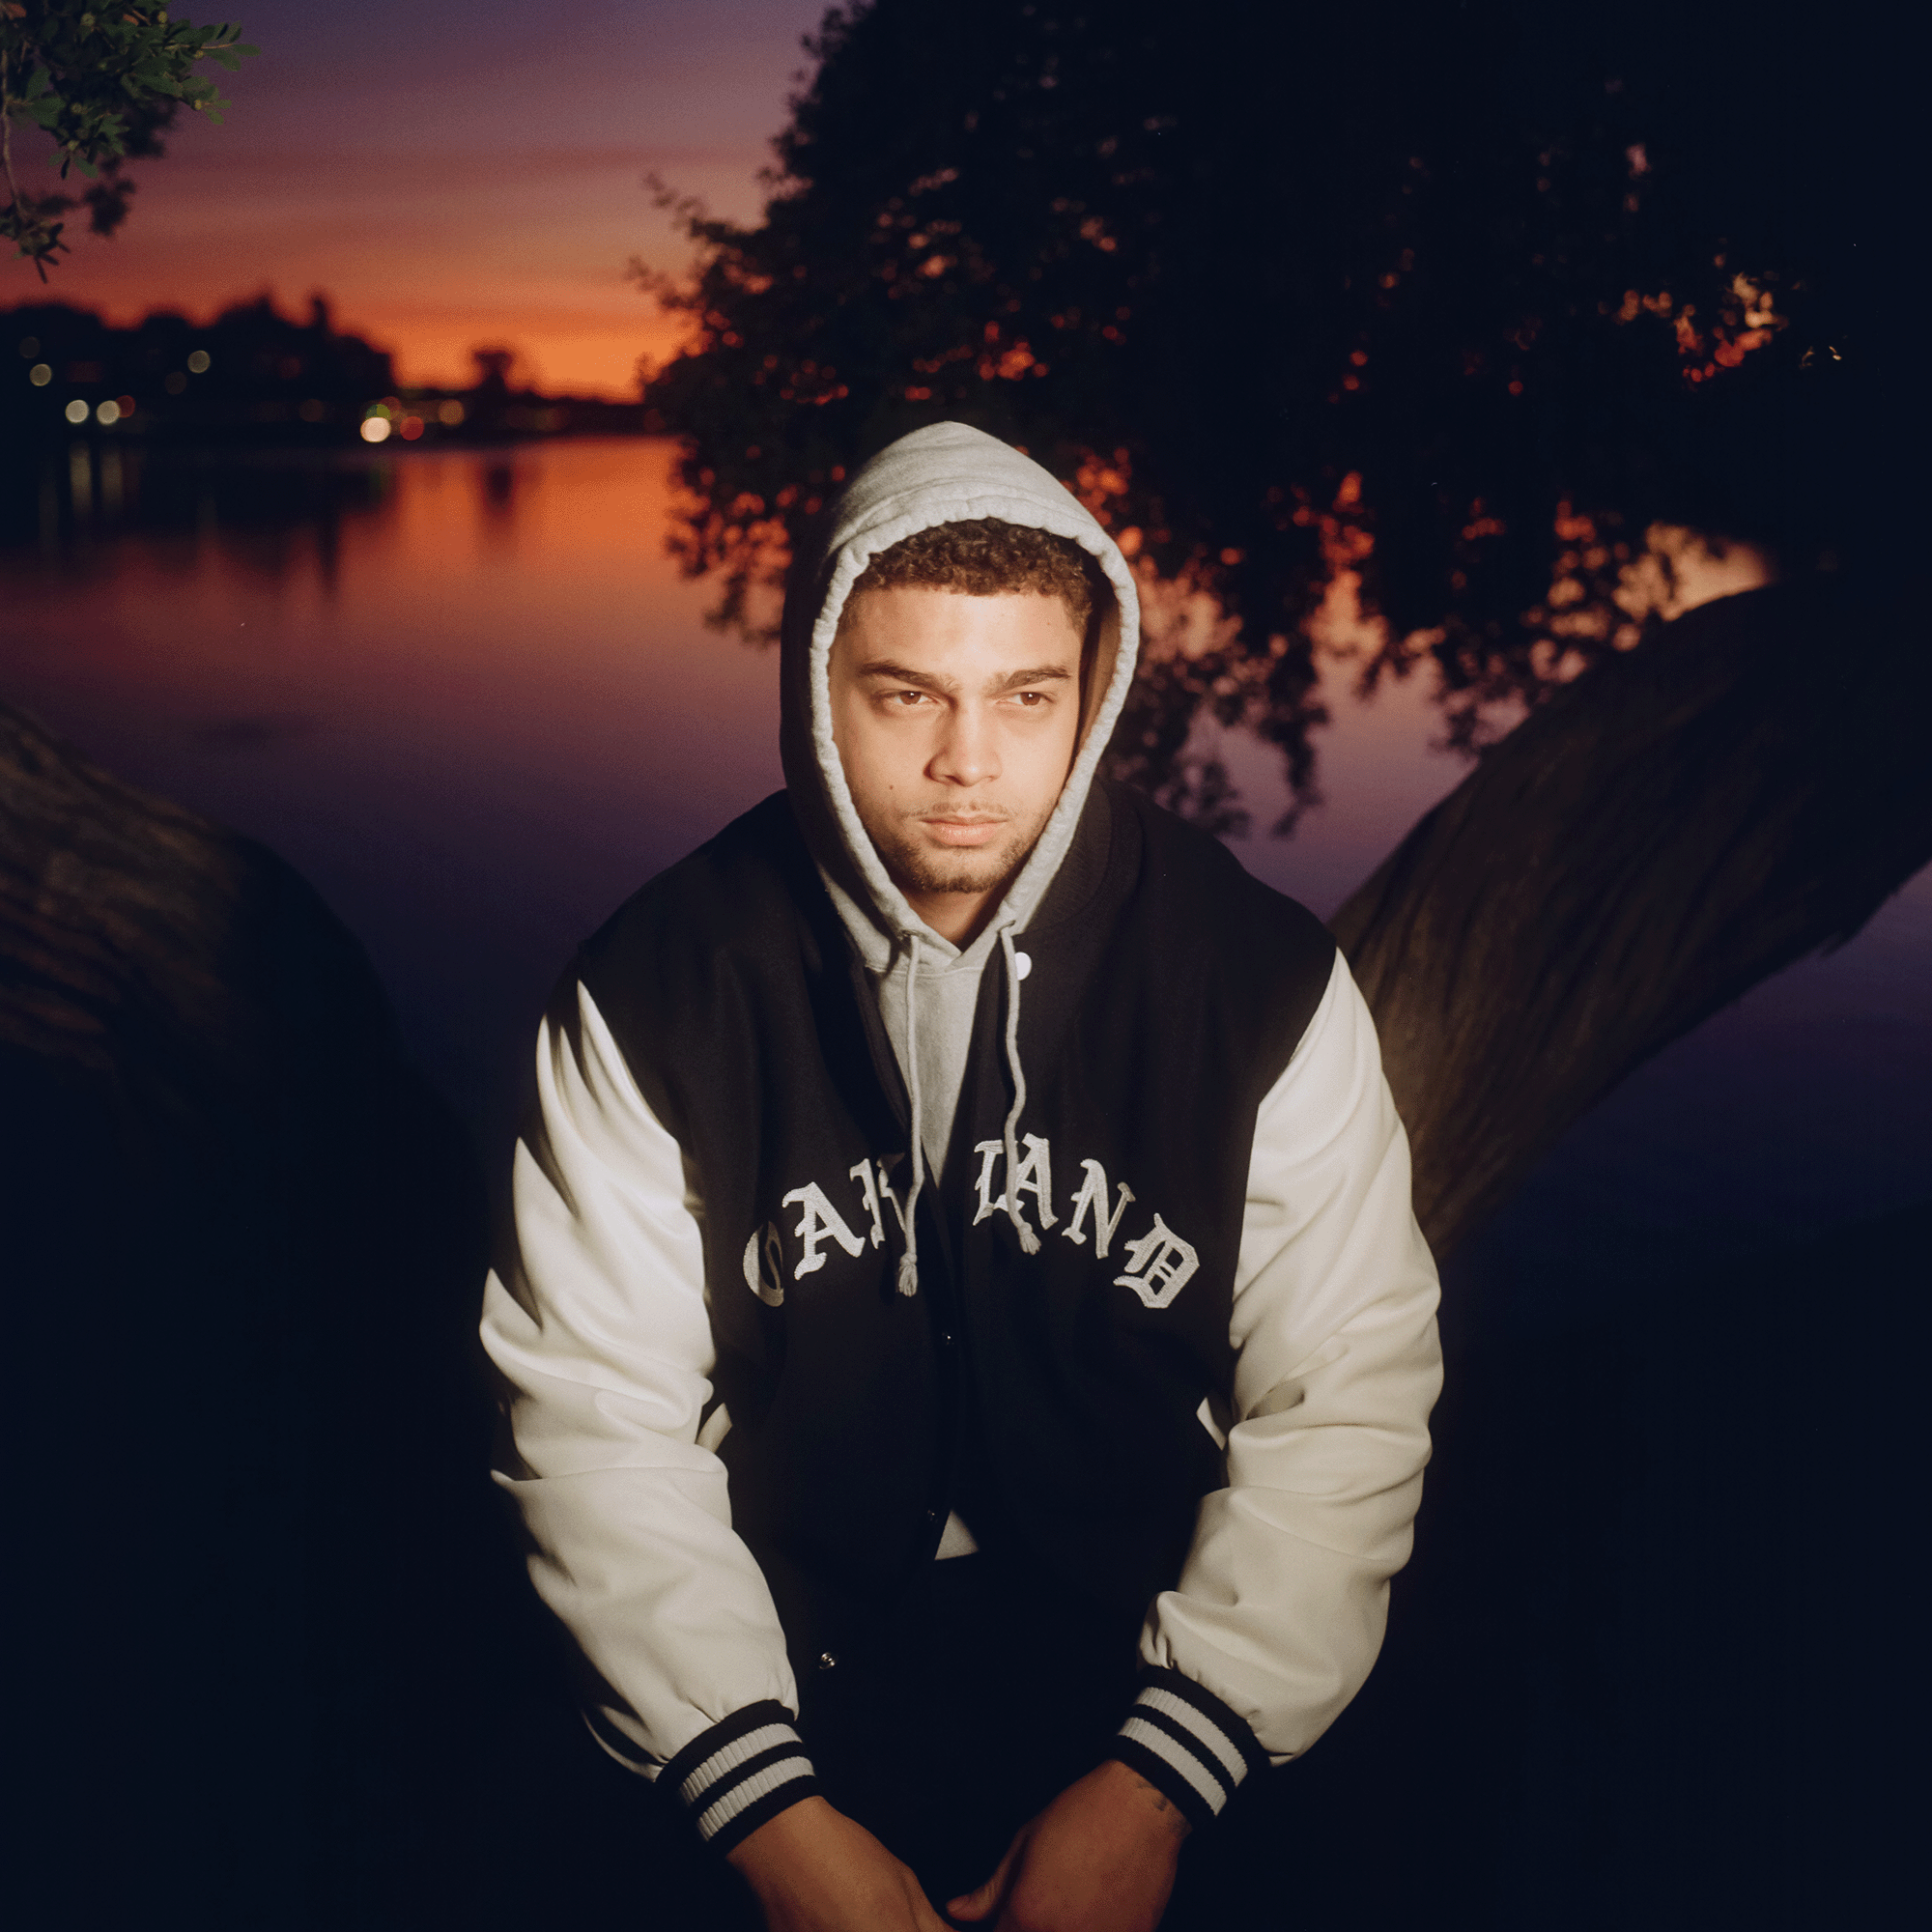 A man sitting beside the lake, facing forward, at sunset wearing a black and white varsity jacket with a large OAKLAND wordmark on the front chest.